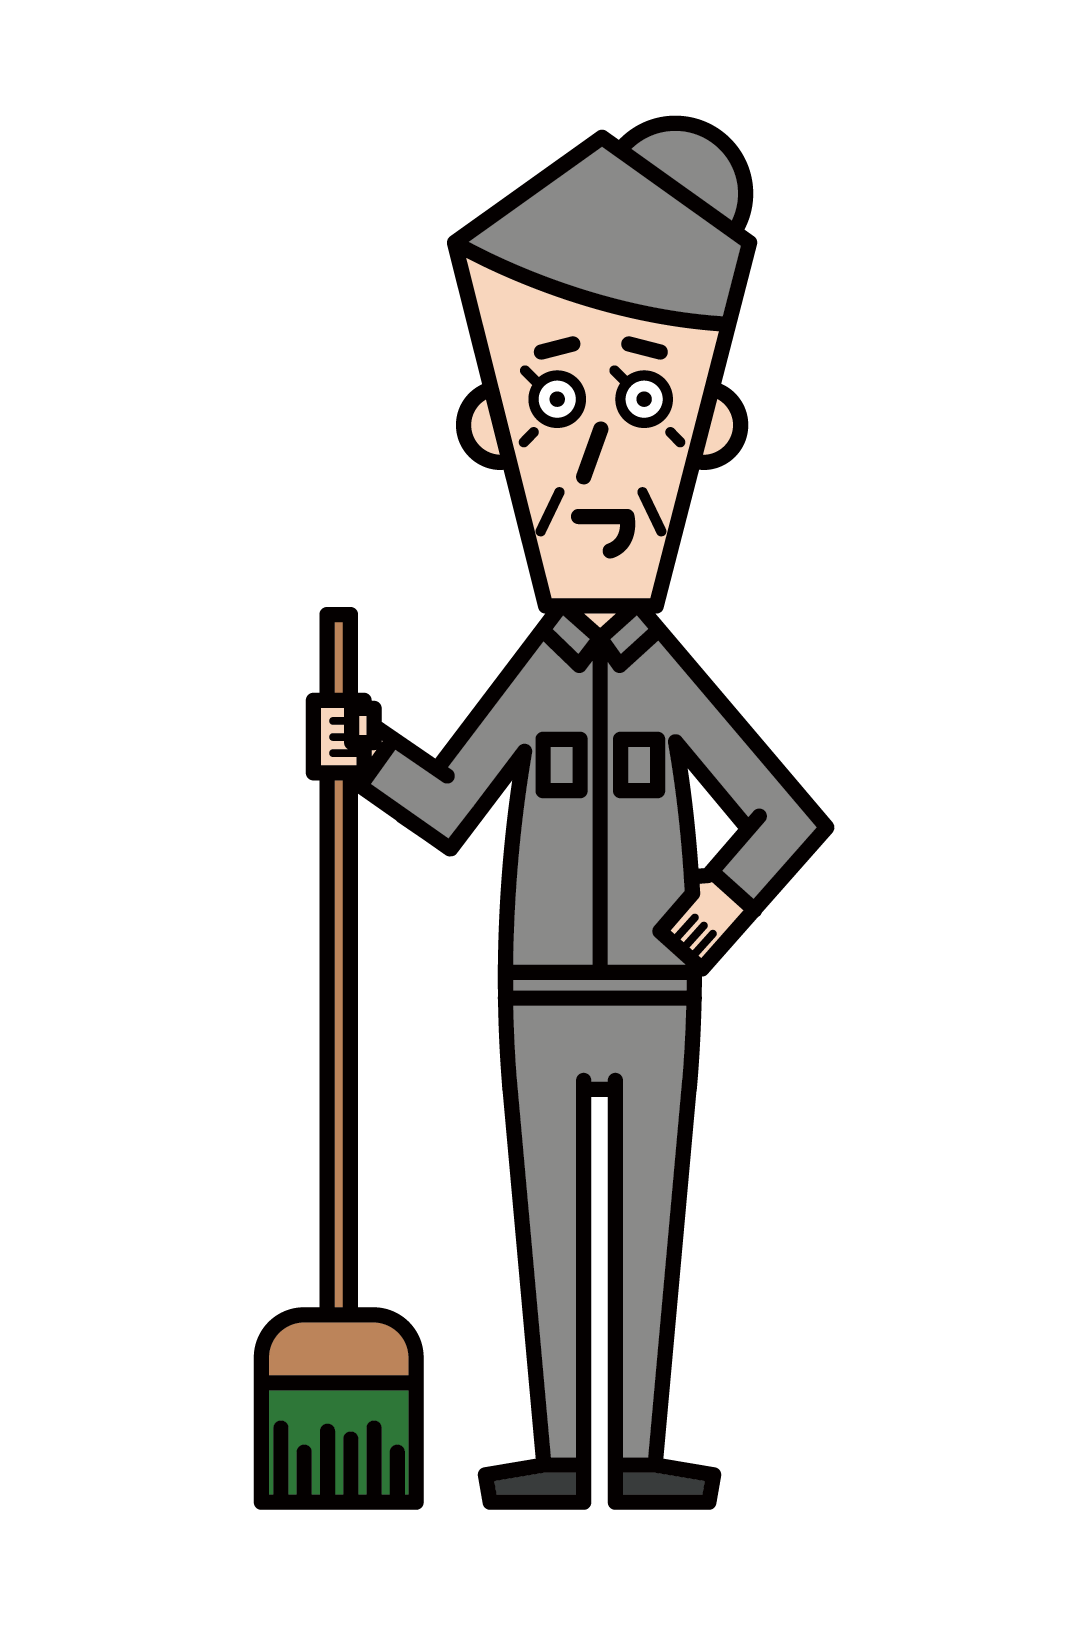 Illustration of a working elderly person (grandfather)